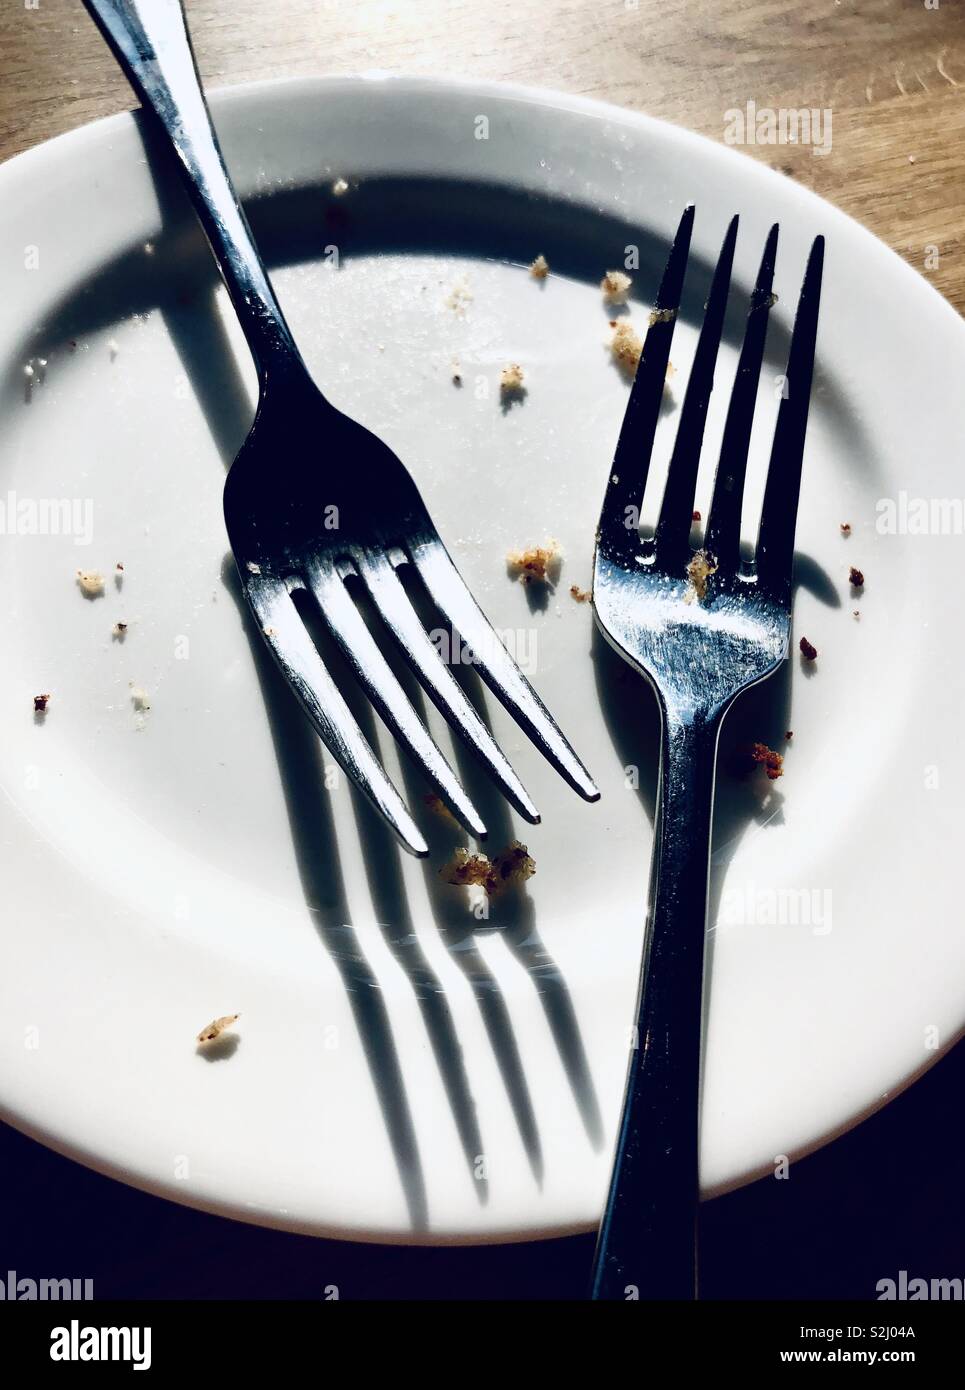 Two forks on a plate with crumbs Stock Photo